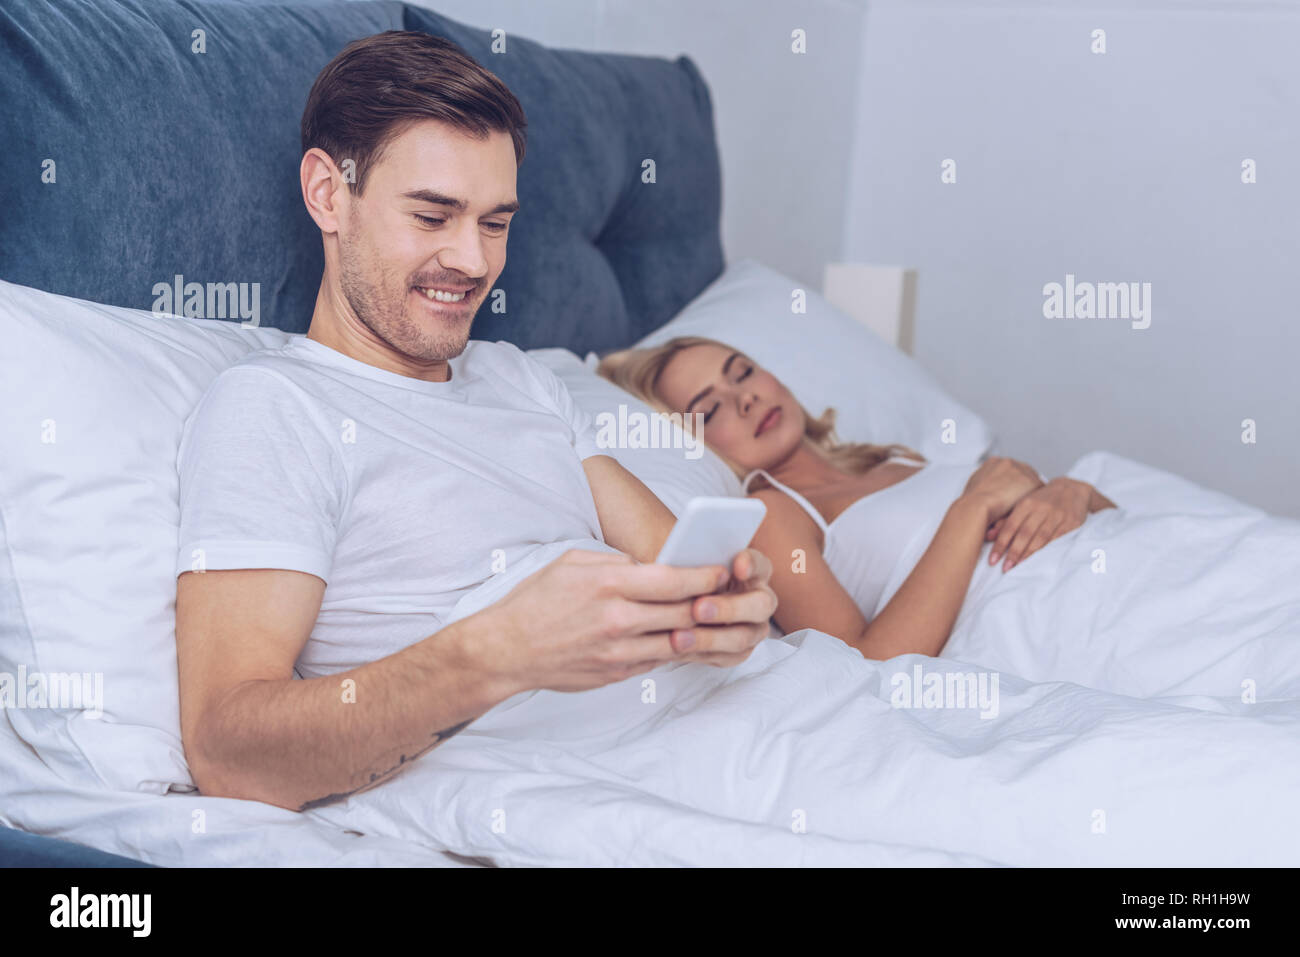 Cheating Wife Stock Photos Cheating Wife Stock Images Alamy